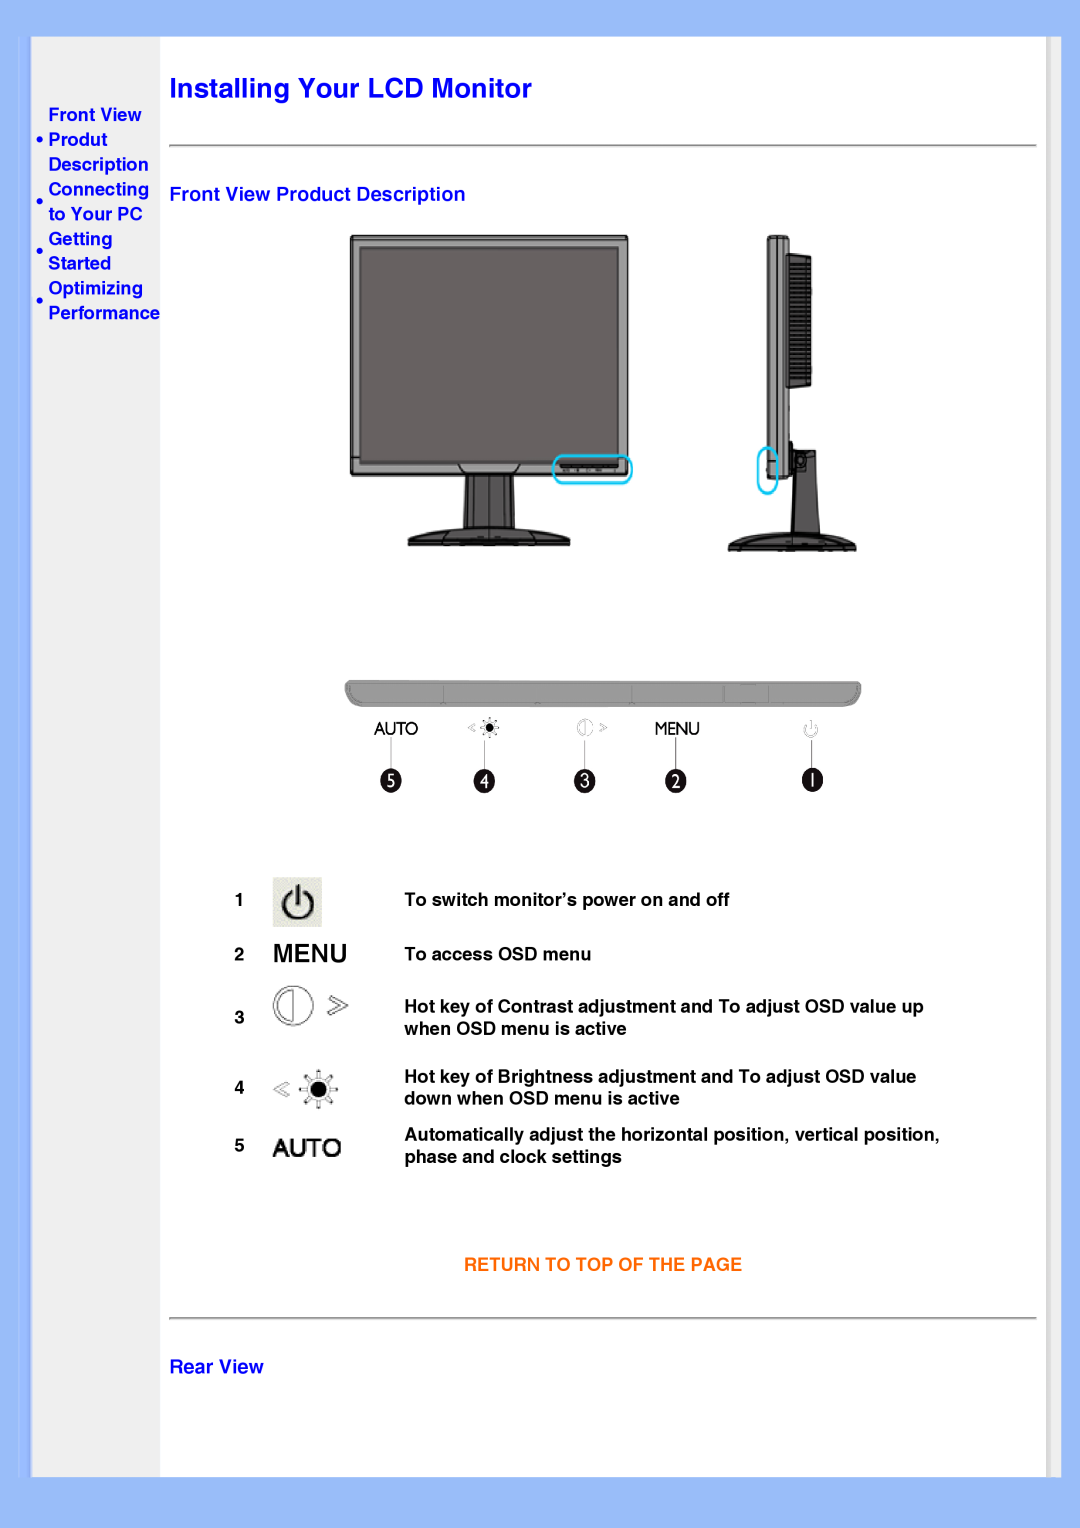 Philips 200AW8 Installing Your LCD Monitor, Menu, Front View Product Description, Rear View, Return To Top Of The Page 